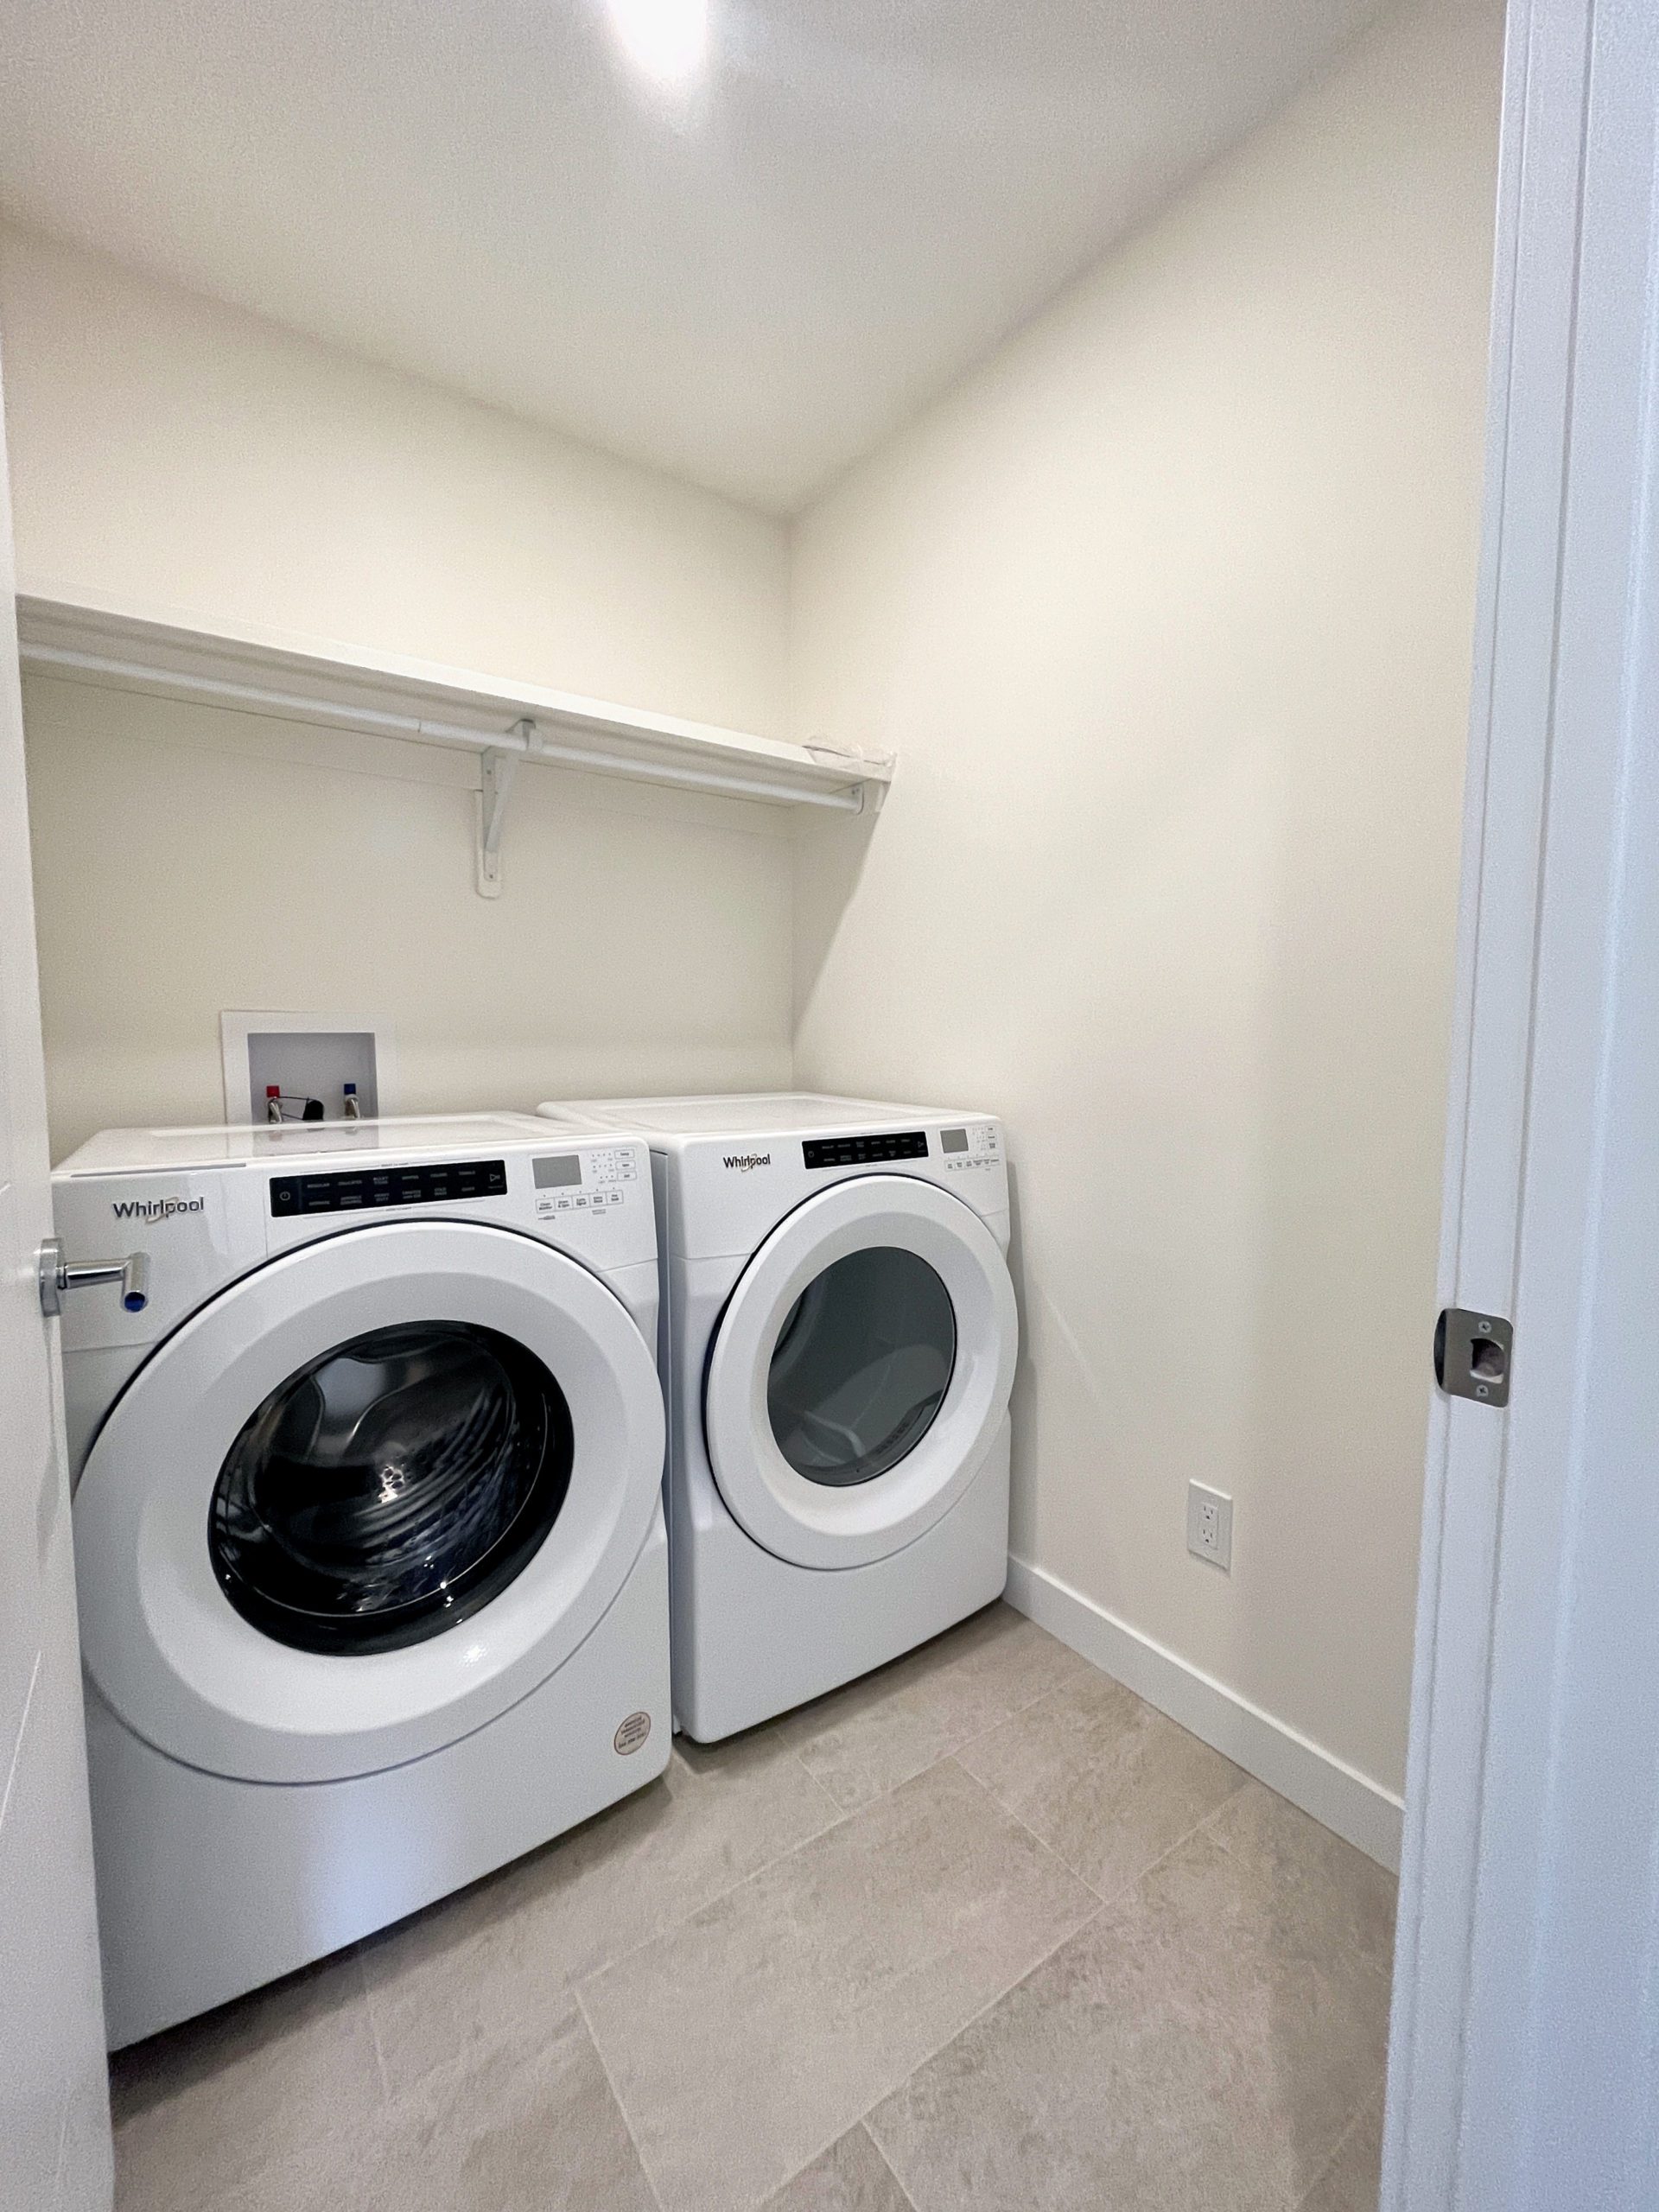 A side-by-side front-load washer and dryer in the upstairs laundry room.